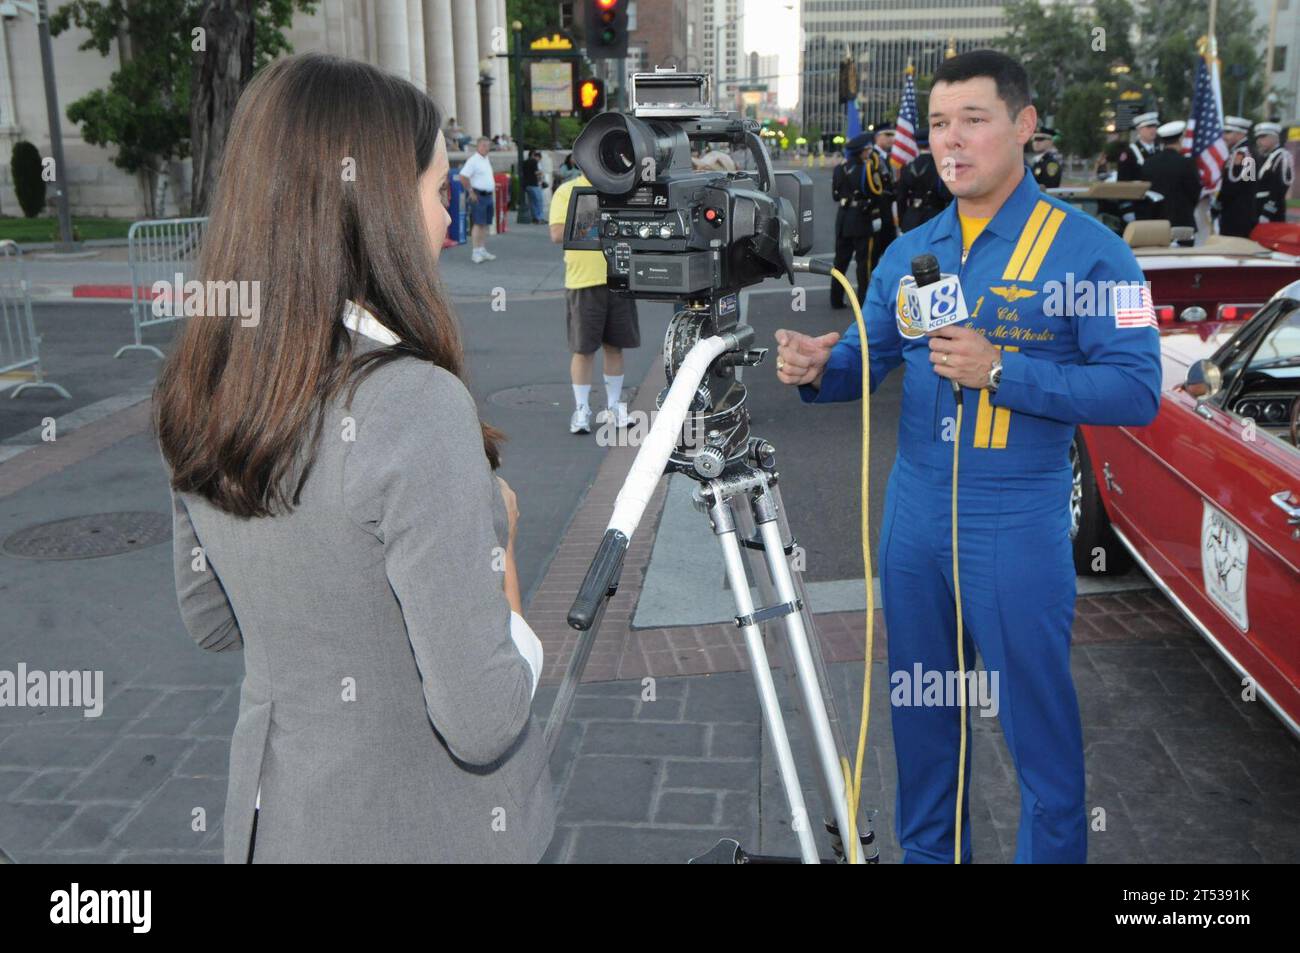 0909166220J-003 RENO, Nev. (Sept. 16, 2009) Cmdr. Greg McWherter, commanding officer of the U.S. Navy flight demonstration squadron, the Blue Angels, is interviewed by a TV reporter before riding in the Heroes Parade during Reno Navy Week. The evening parade through downtown Reno honored emergency first responders, veterans and active duty and retired military personnel. Reno Navy Week is one of 21 Navy Weeks being held in selected cities throughout the country in 2009. They are designed to show Americans the investment they have made in their Navy and increase awareness in metropolitan areas Stock Photo